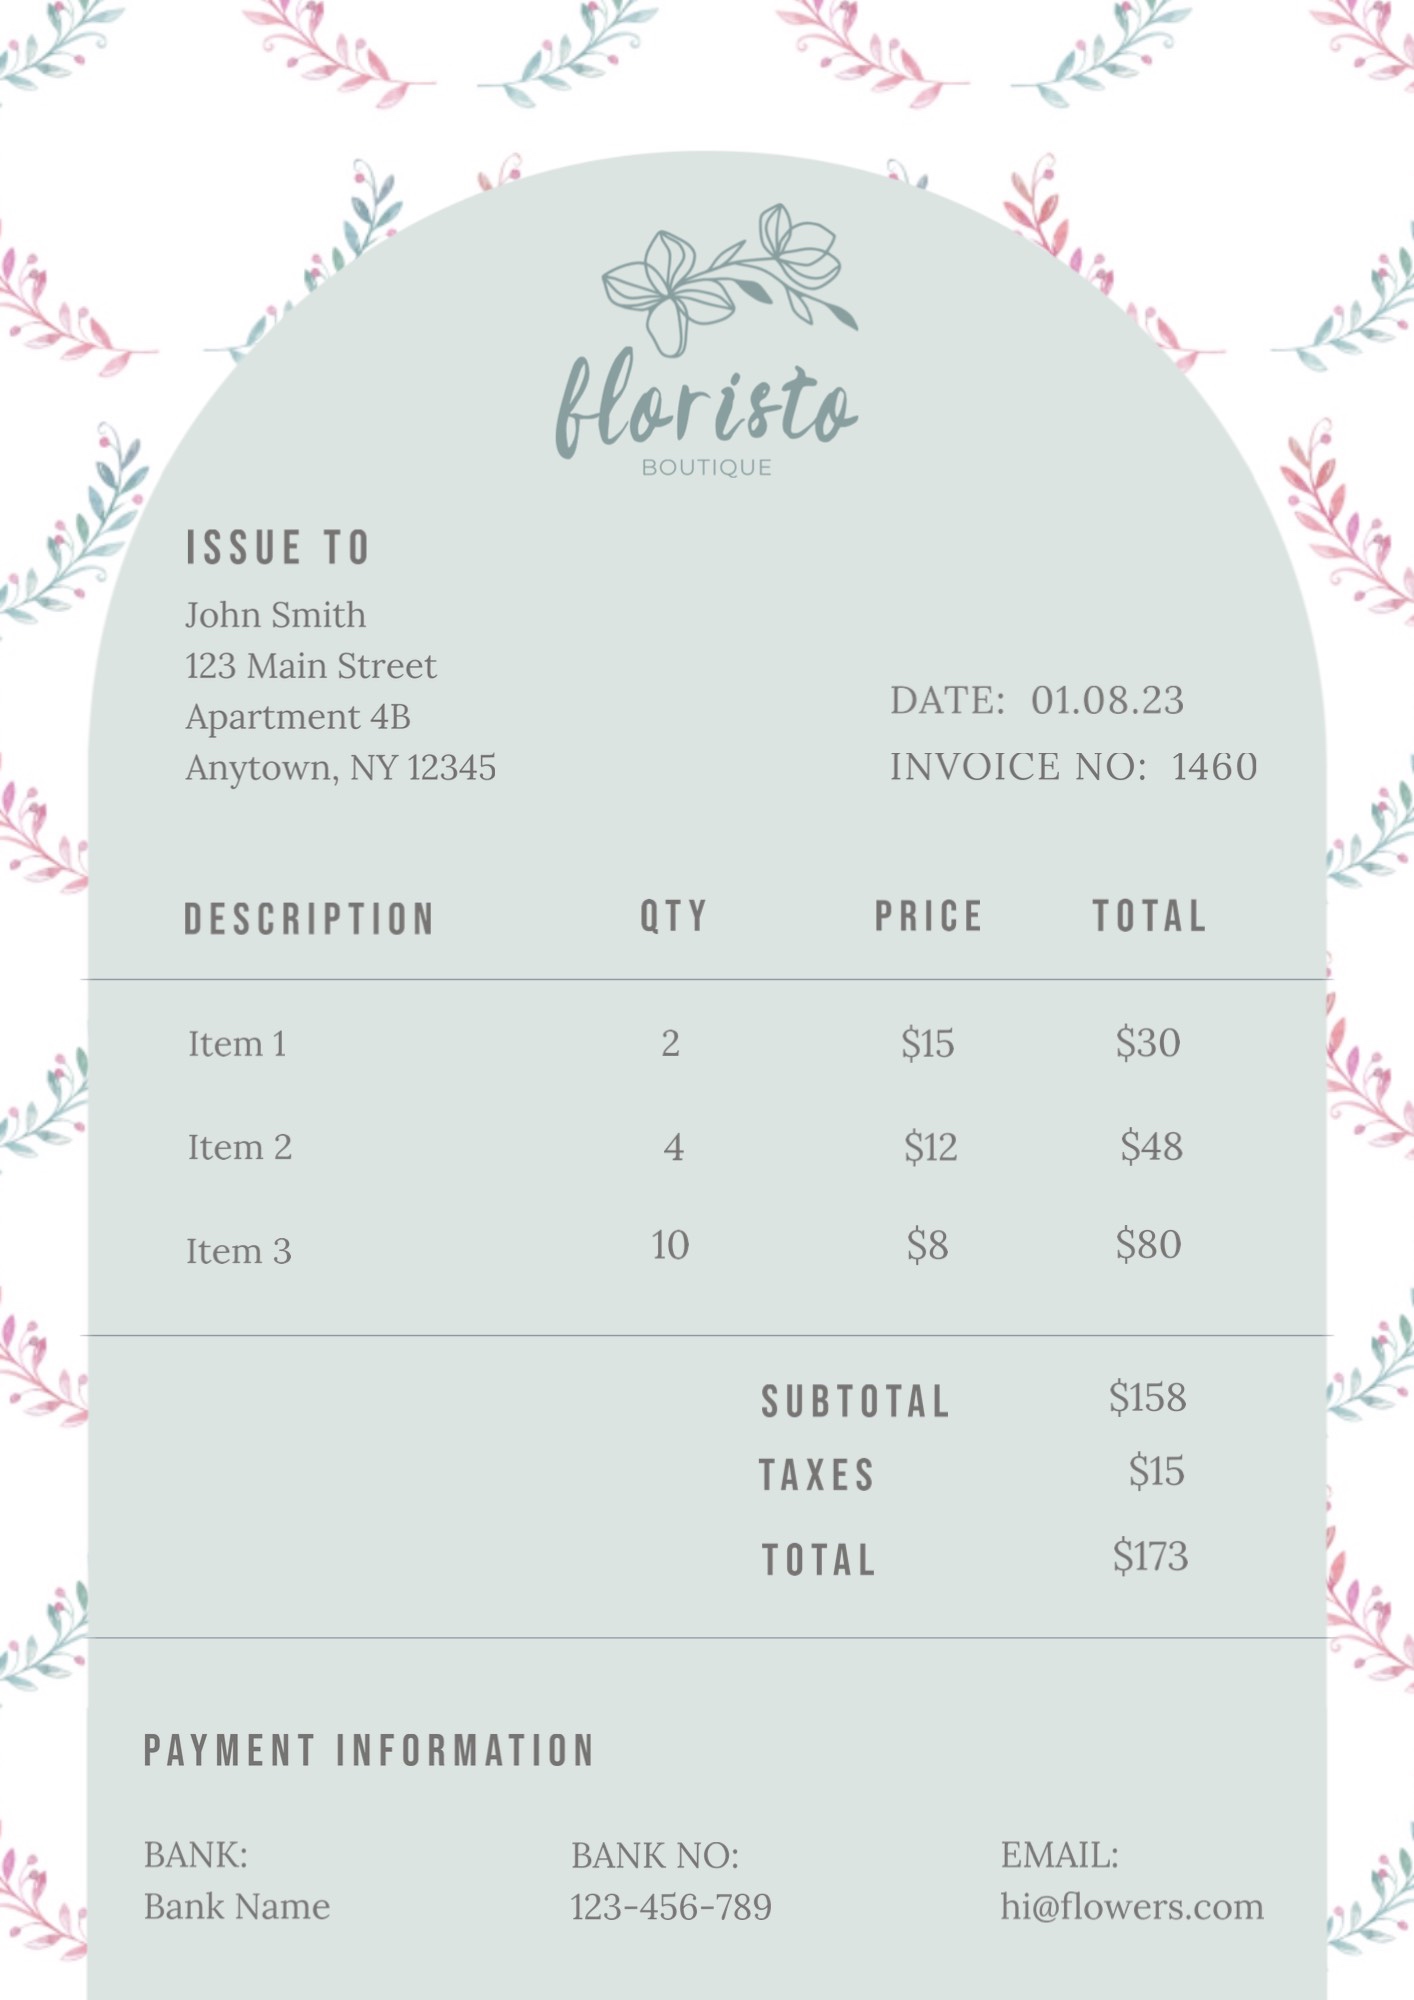  small business floral pastel elegant invoice template 